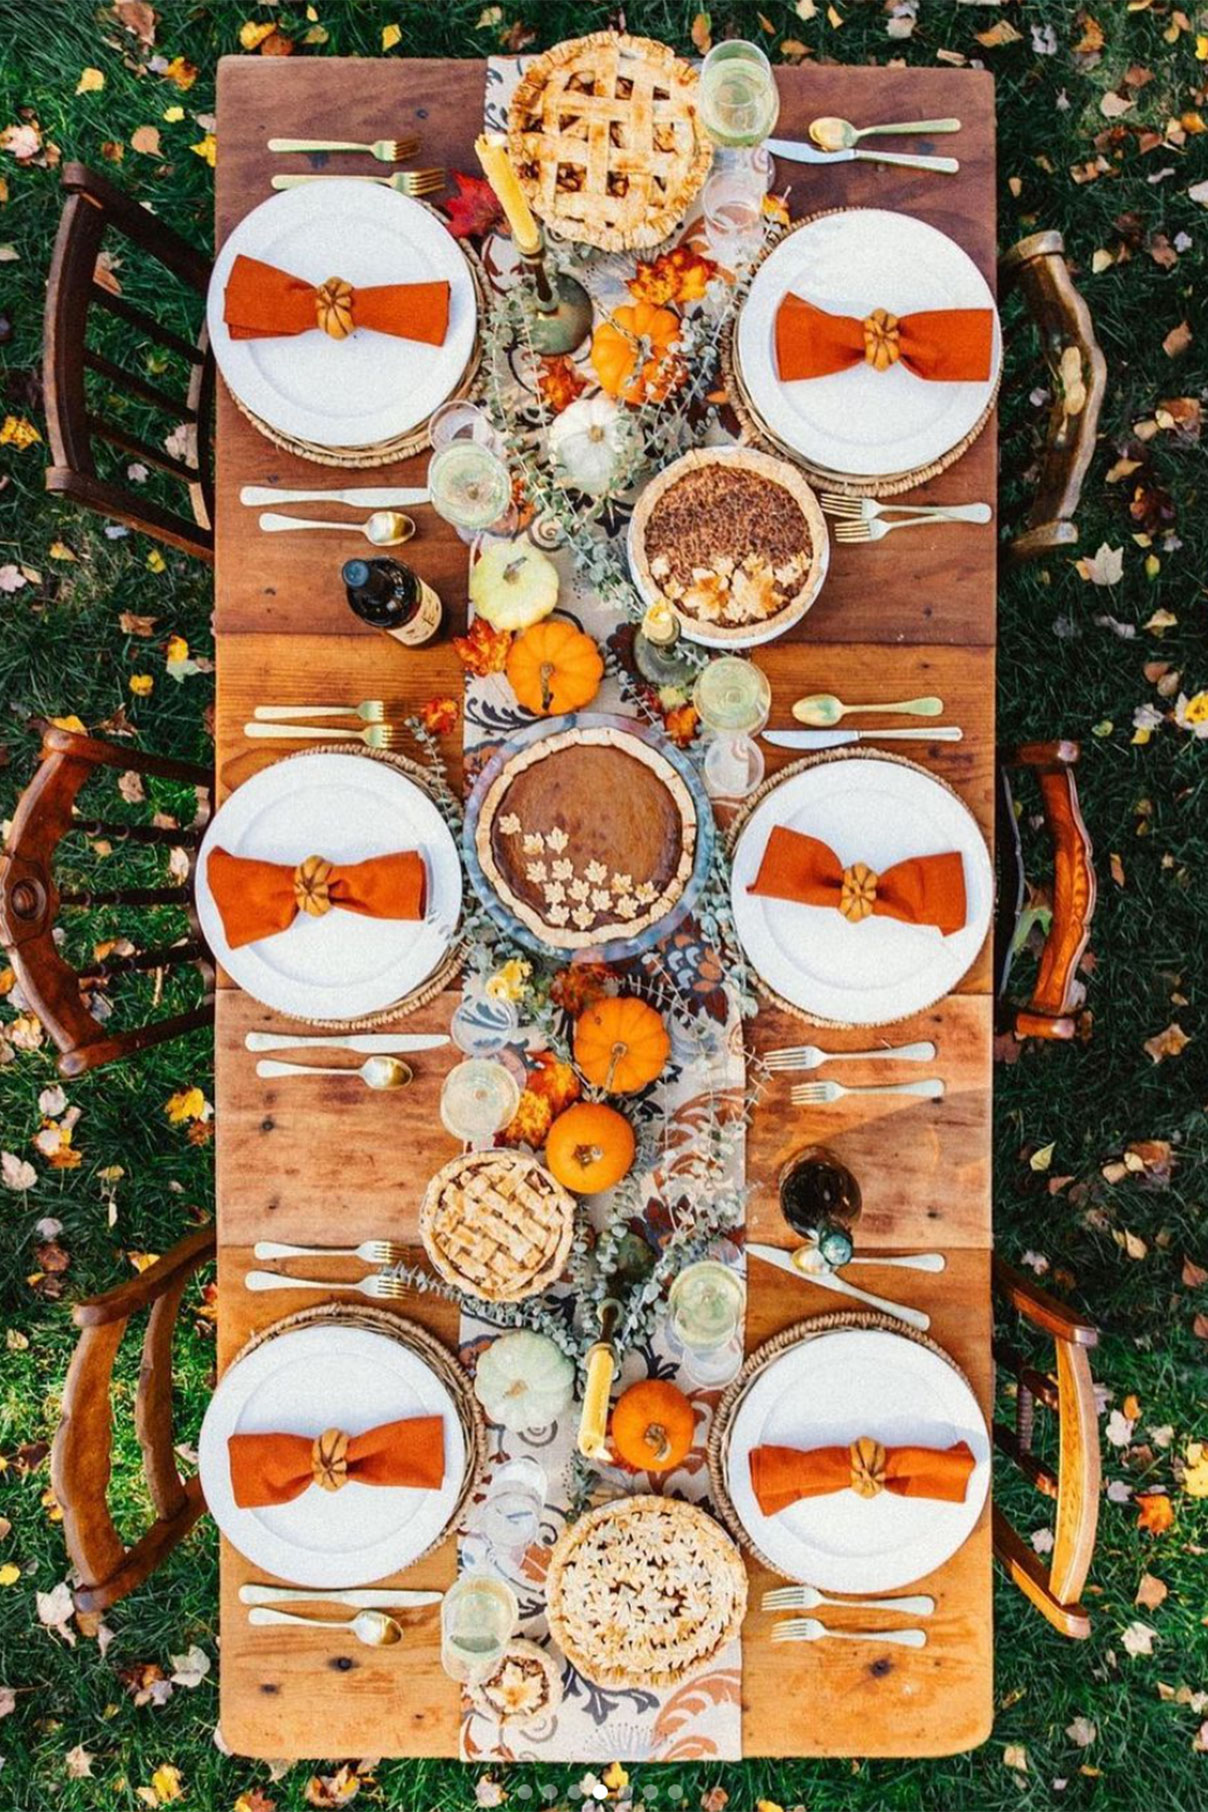 13 Friendsgiving ideas for a Pinterest-worthy fall dinner party